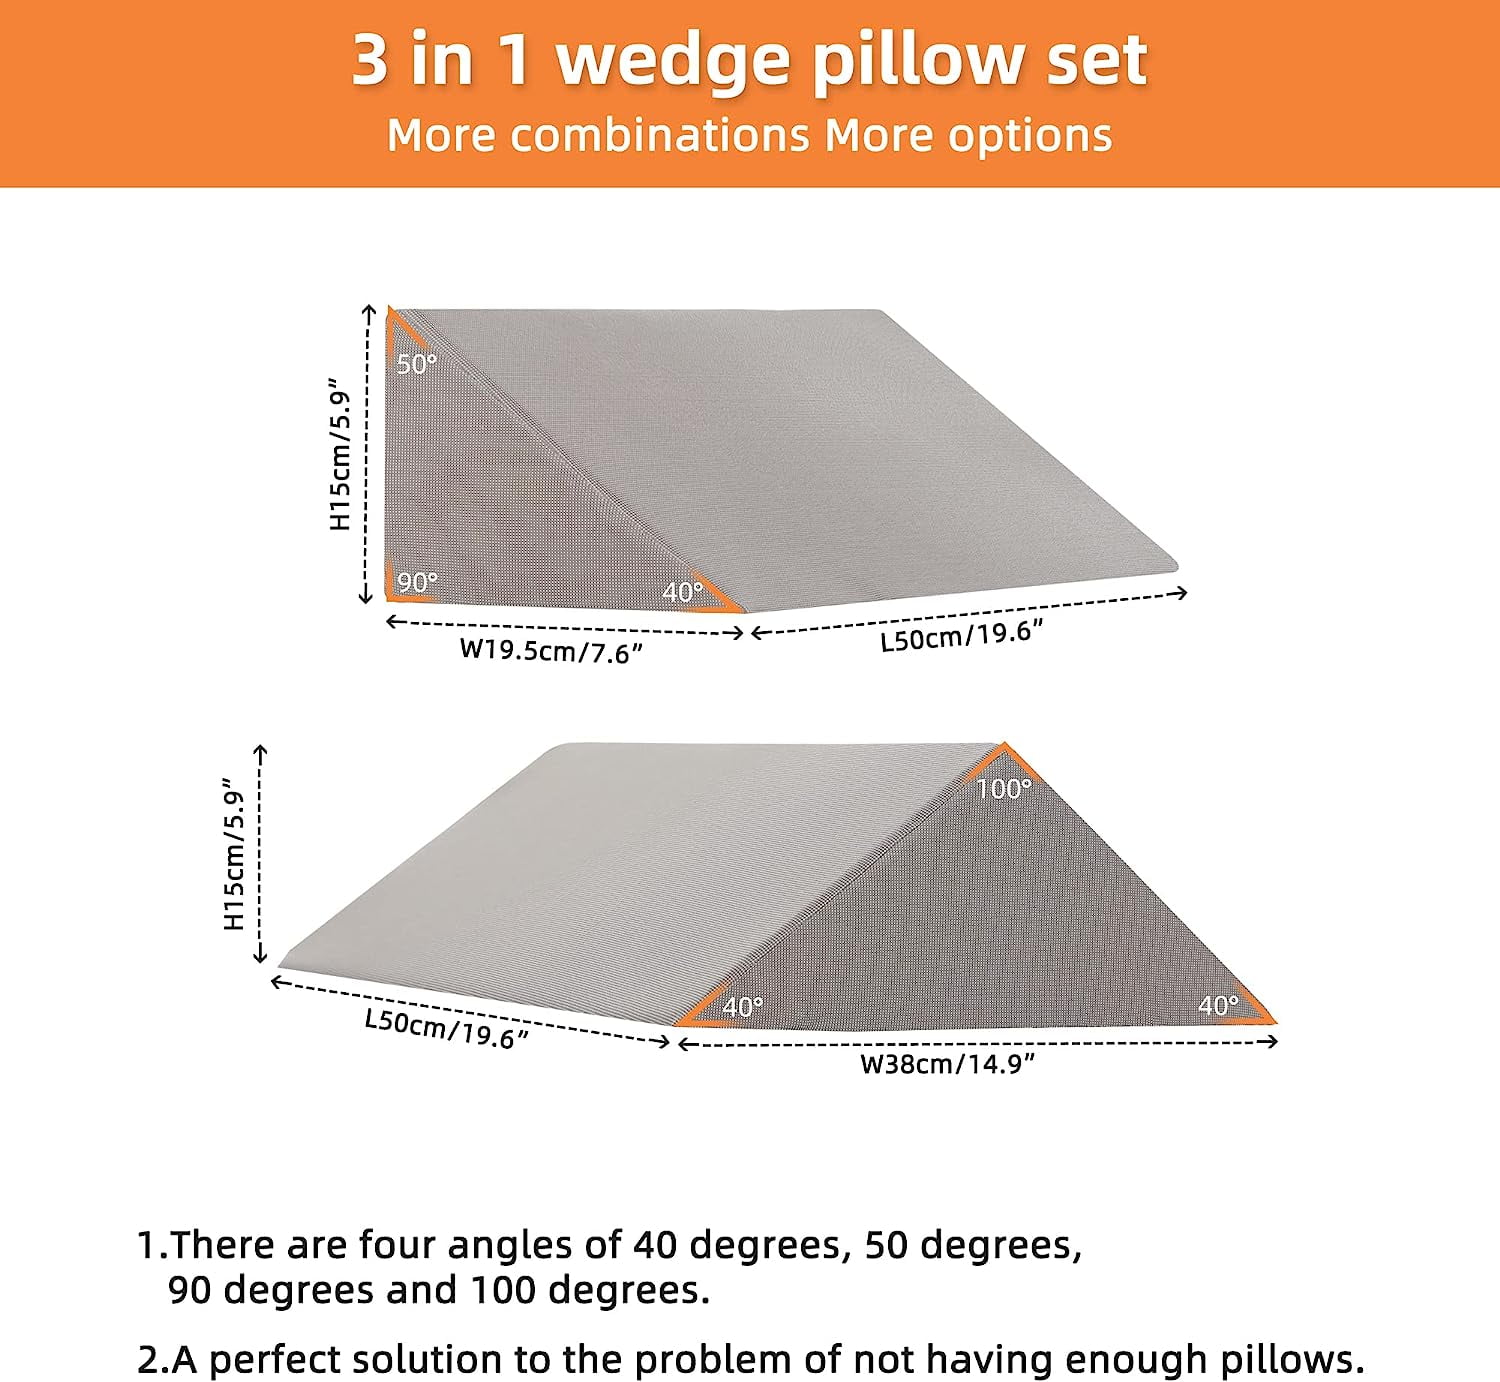 Fanwer Bed Wedges & Body Positioners (3 in 1), 40 Degree Wedges for Bed  Positioning,Positioning Pillows for Elderly, Wedge Pillow for Bed Sores,  Side